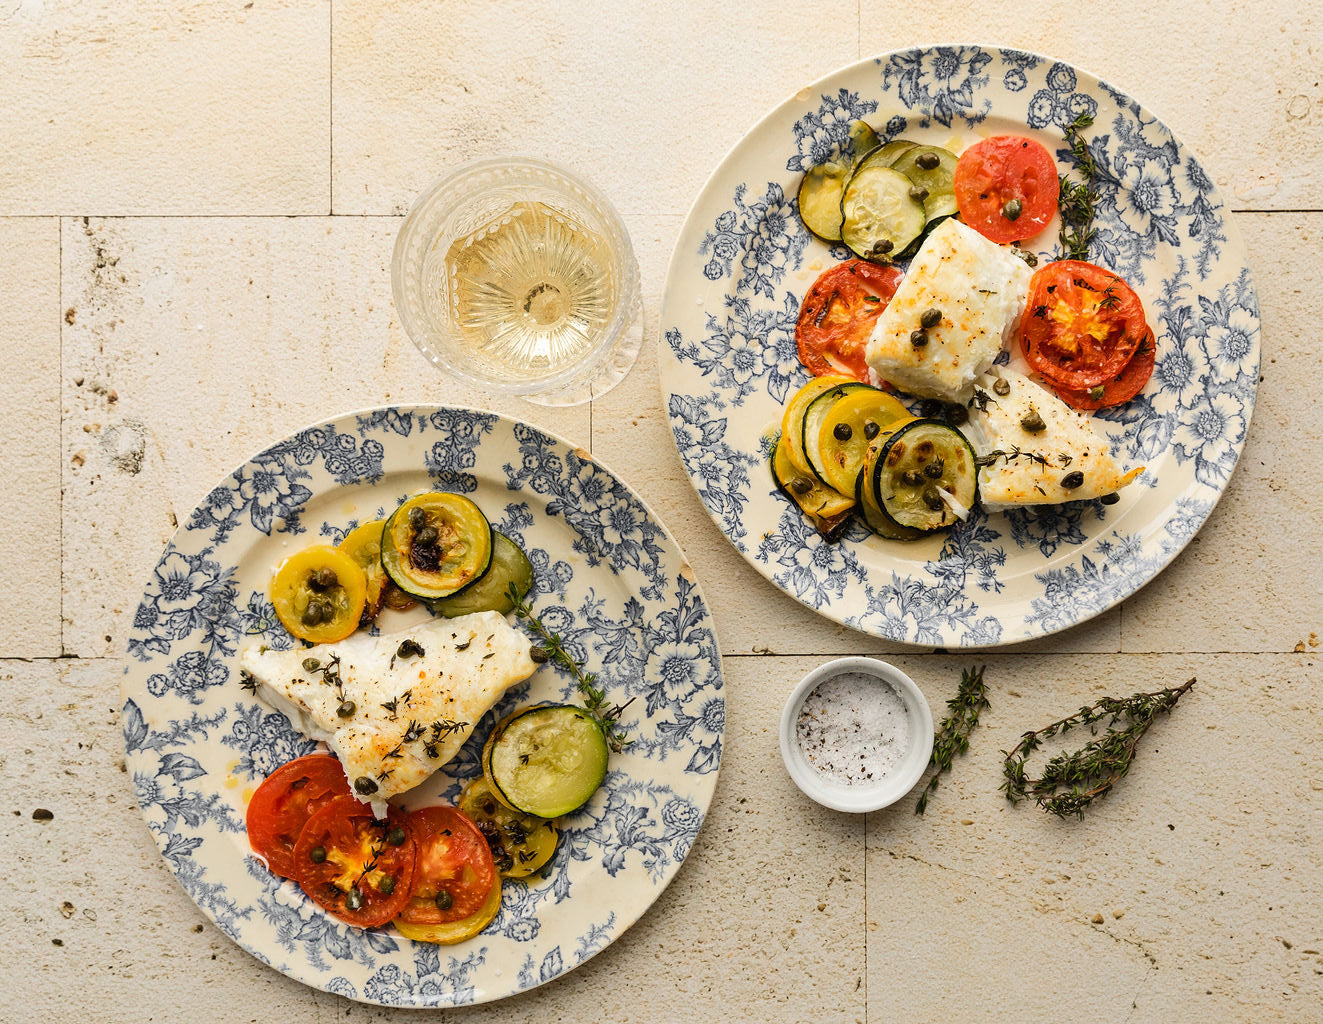 BAKED HALIBUT WITH SUMMER SQUASH